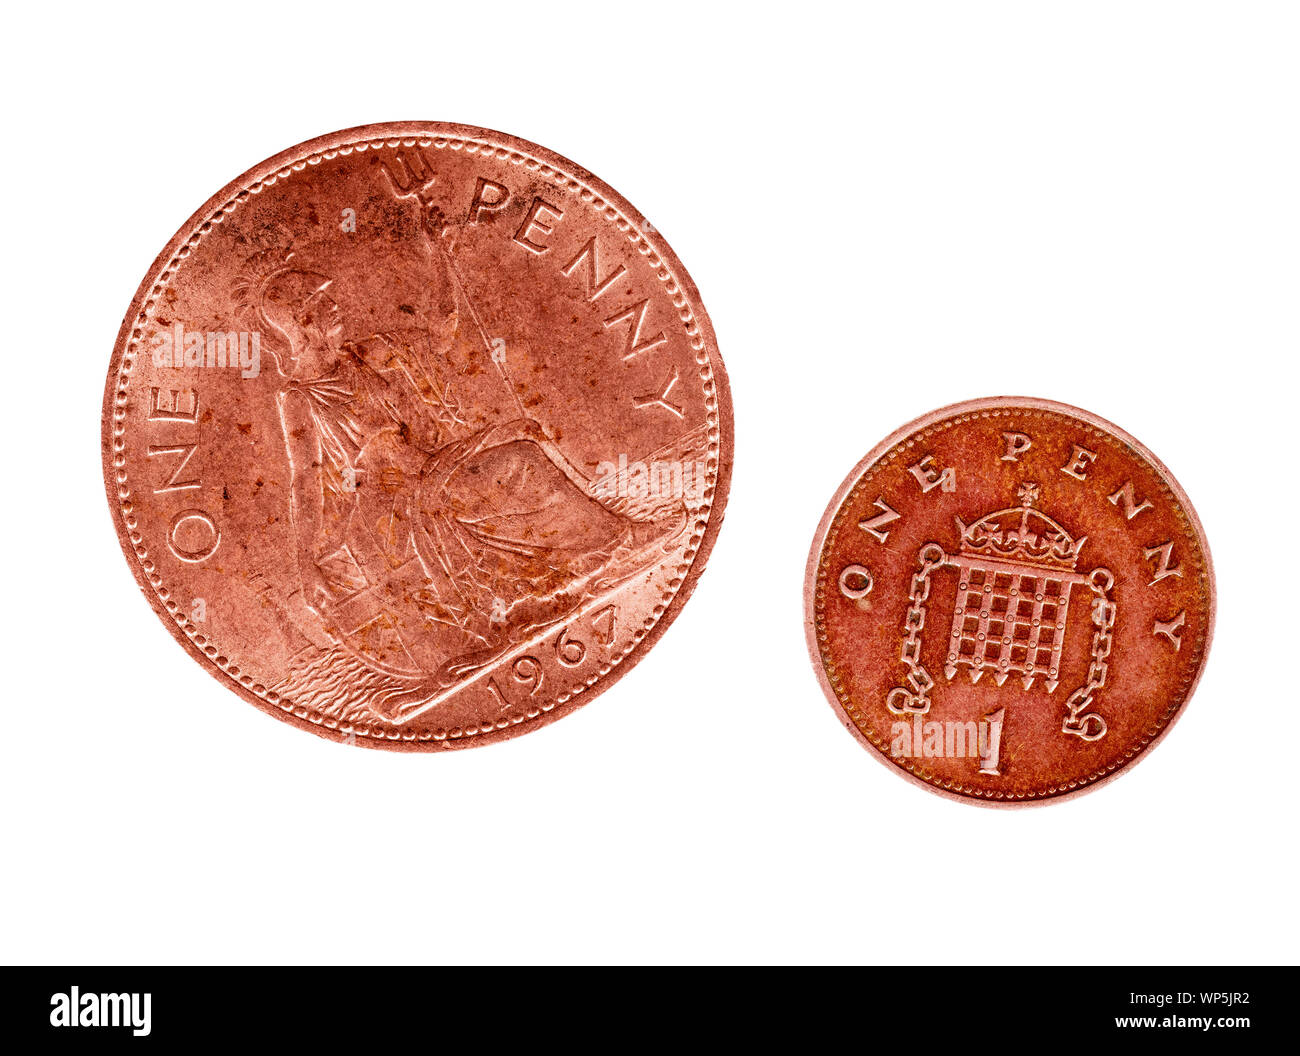 From Rule Britannia to a Portcullis defence object. UK old and new penny coins. Isolated on white background. Maybe concept, metaphor. Stock Photo